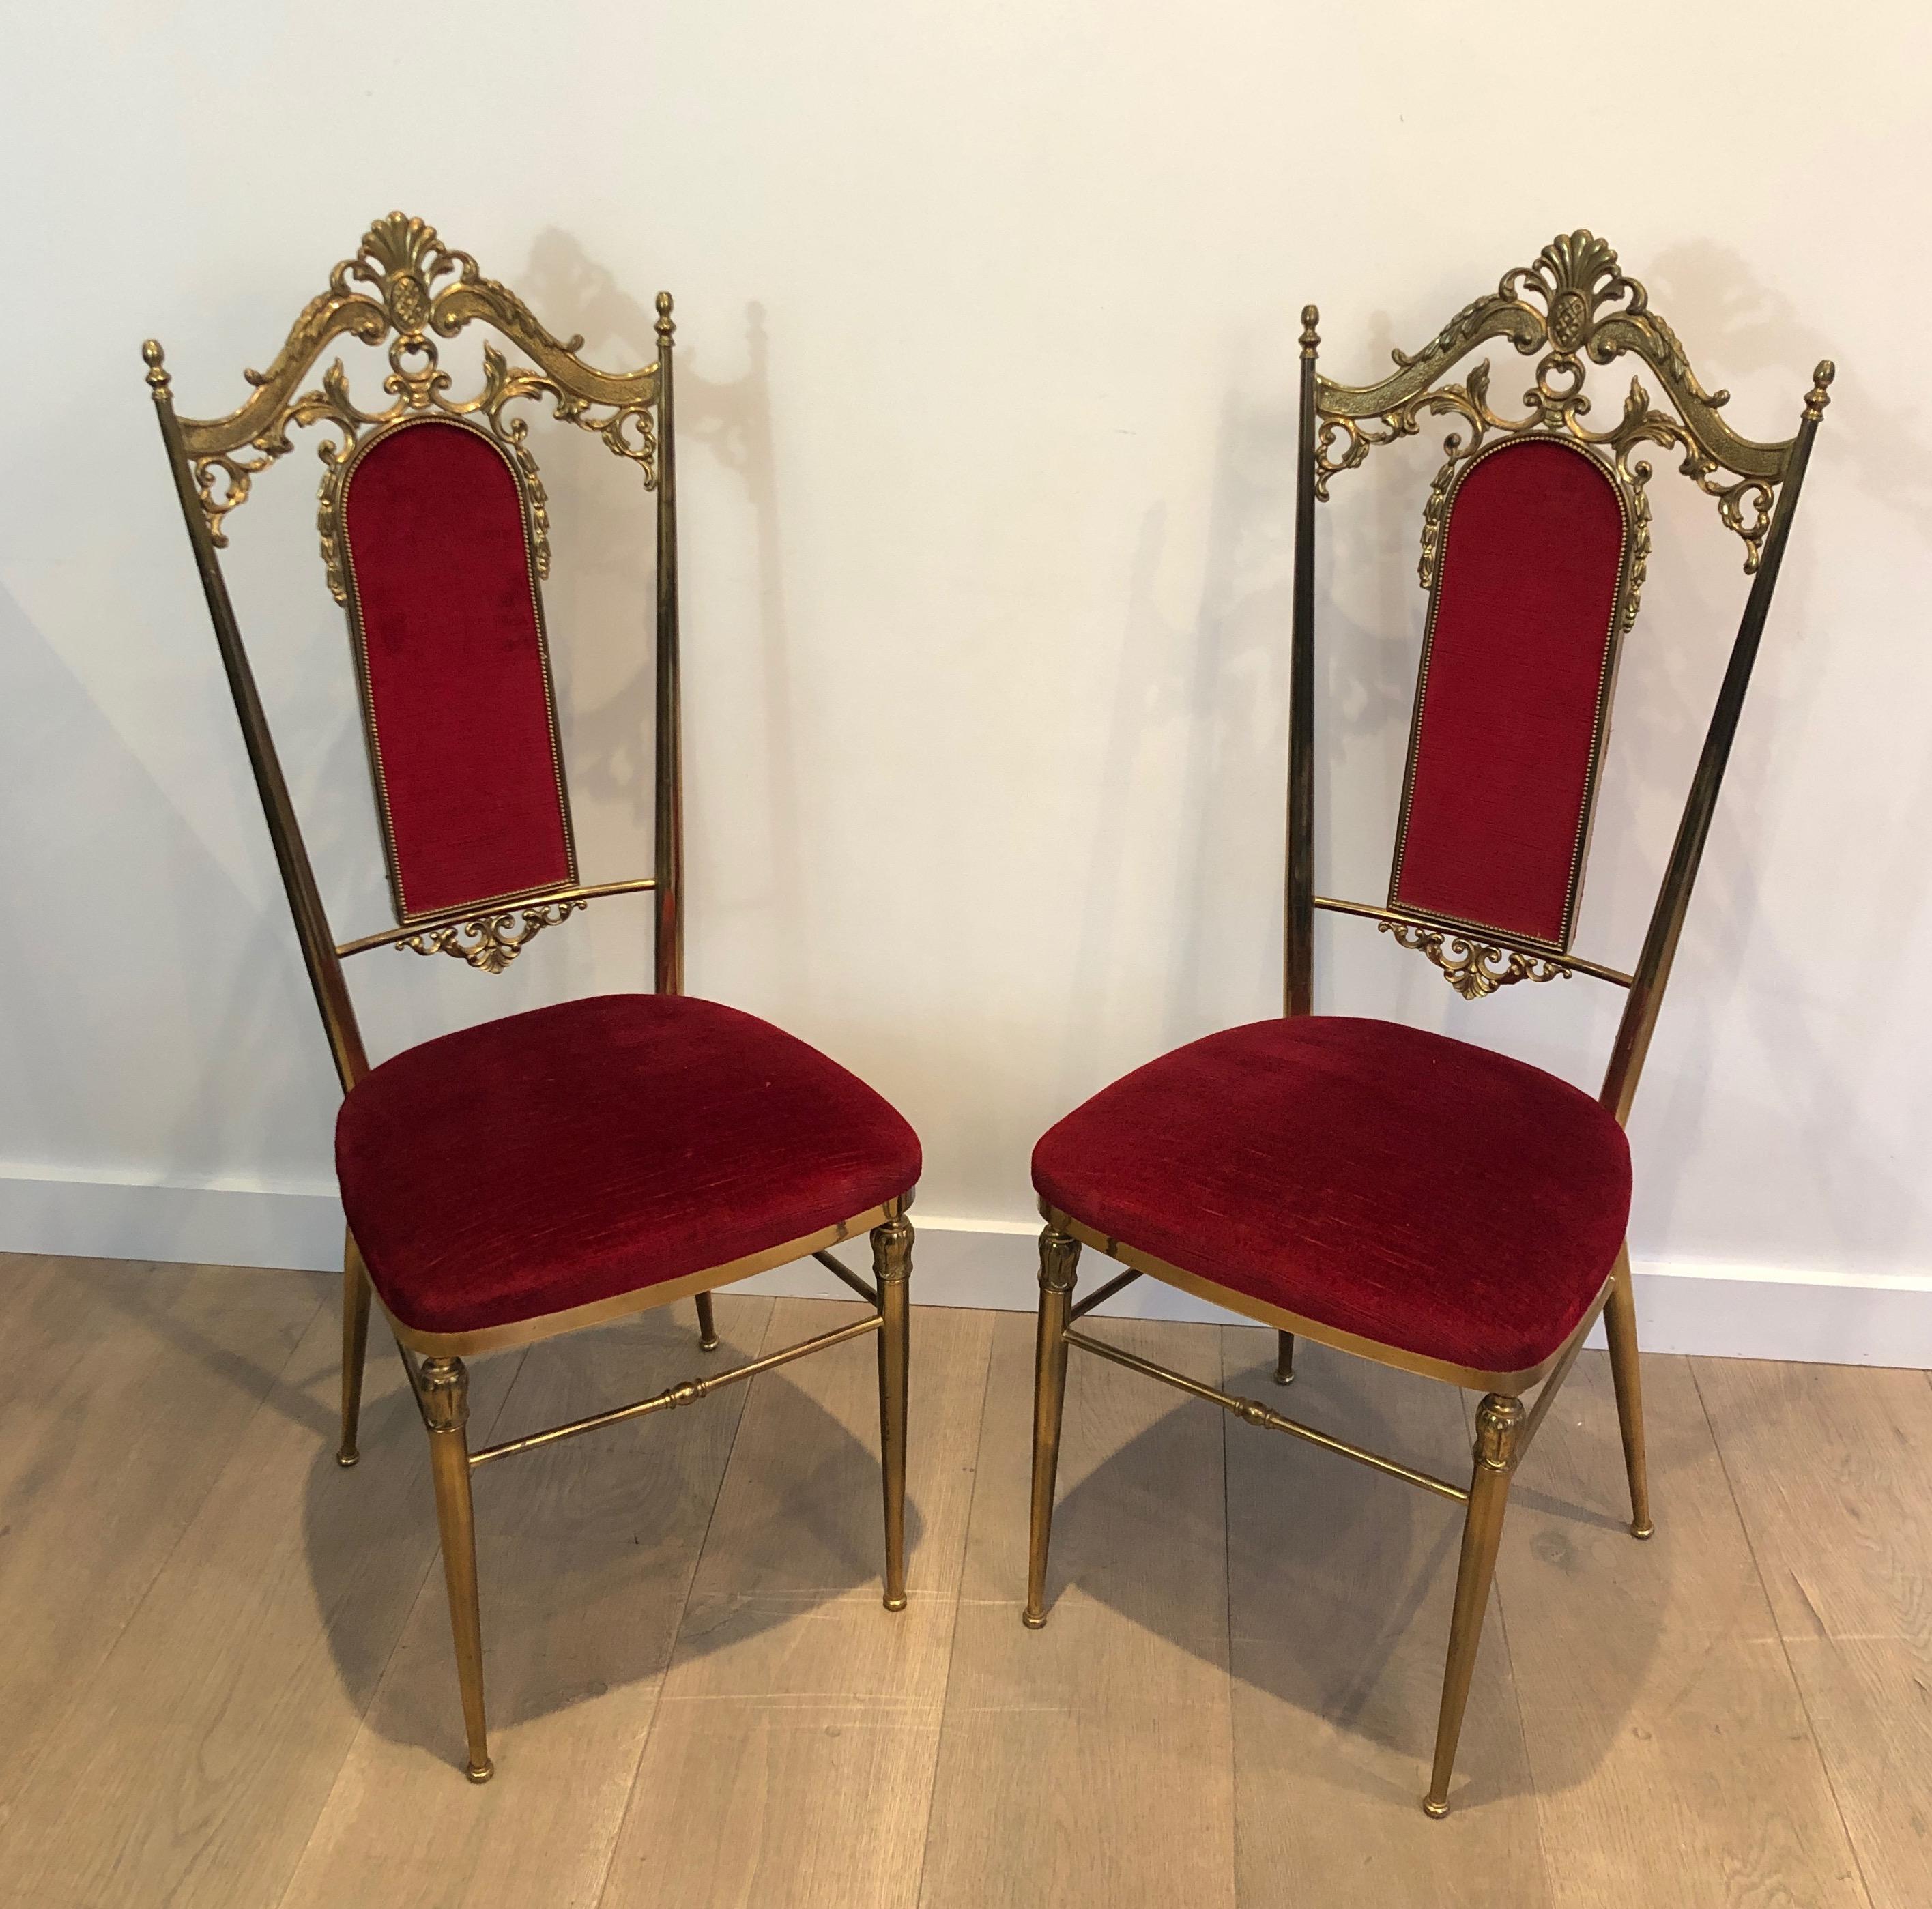 This nice and rare set of 4 neoclassical style chairs is made of brass and red velvet. This is a French work, in the style of famous designer Maison Jansen. Circa 1940.